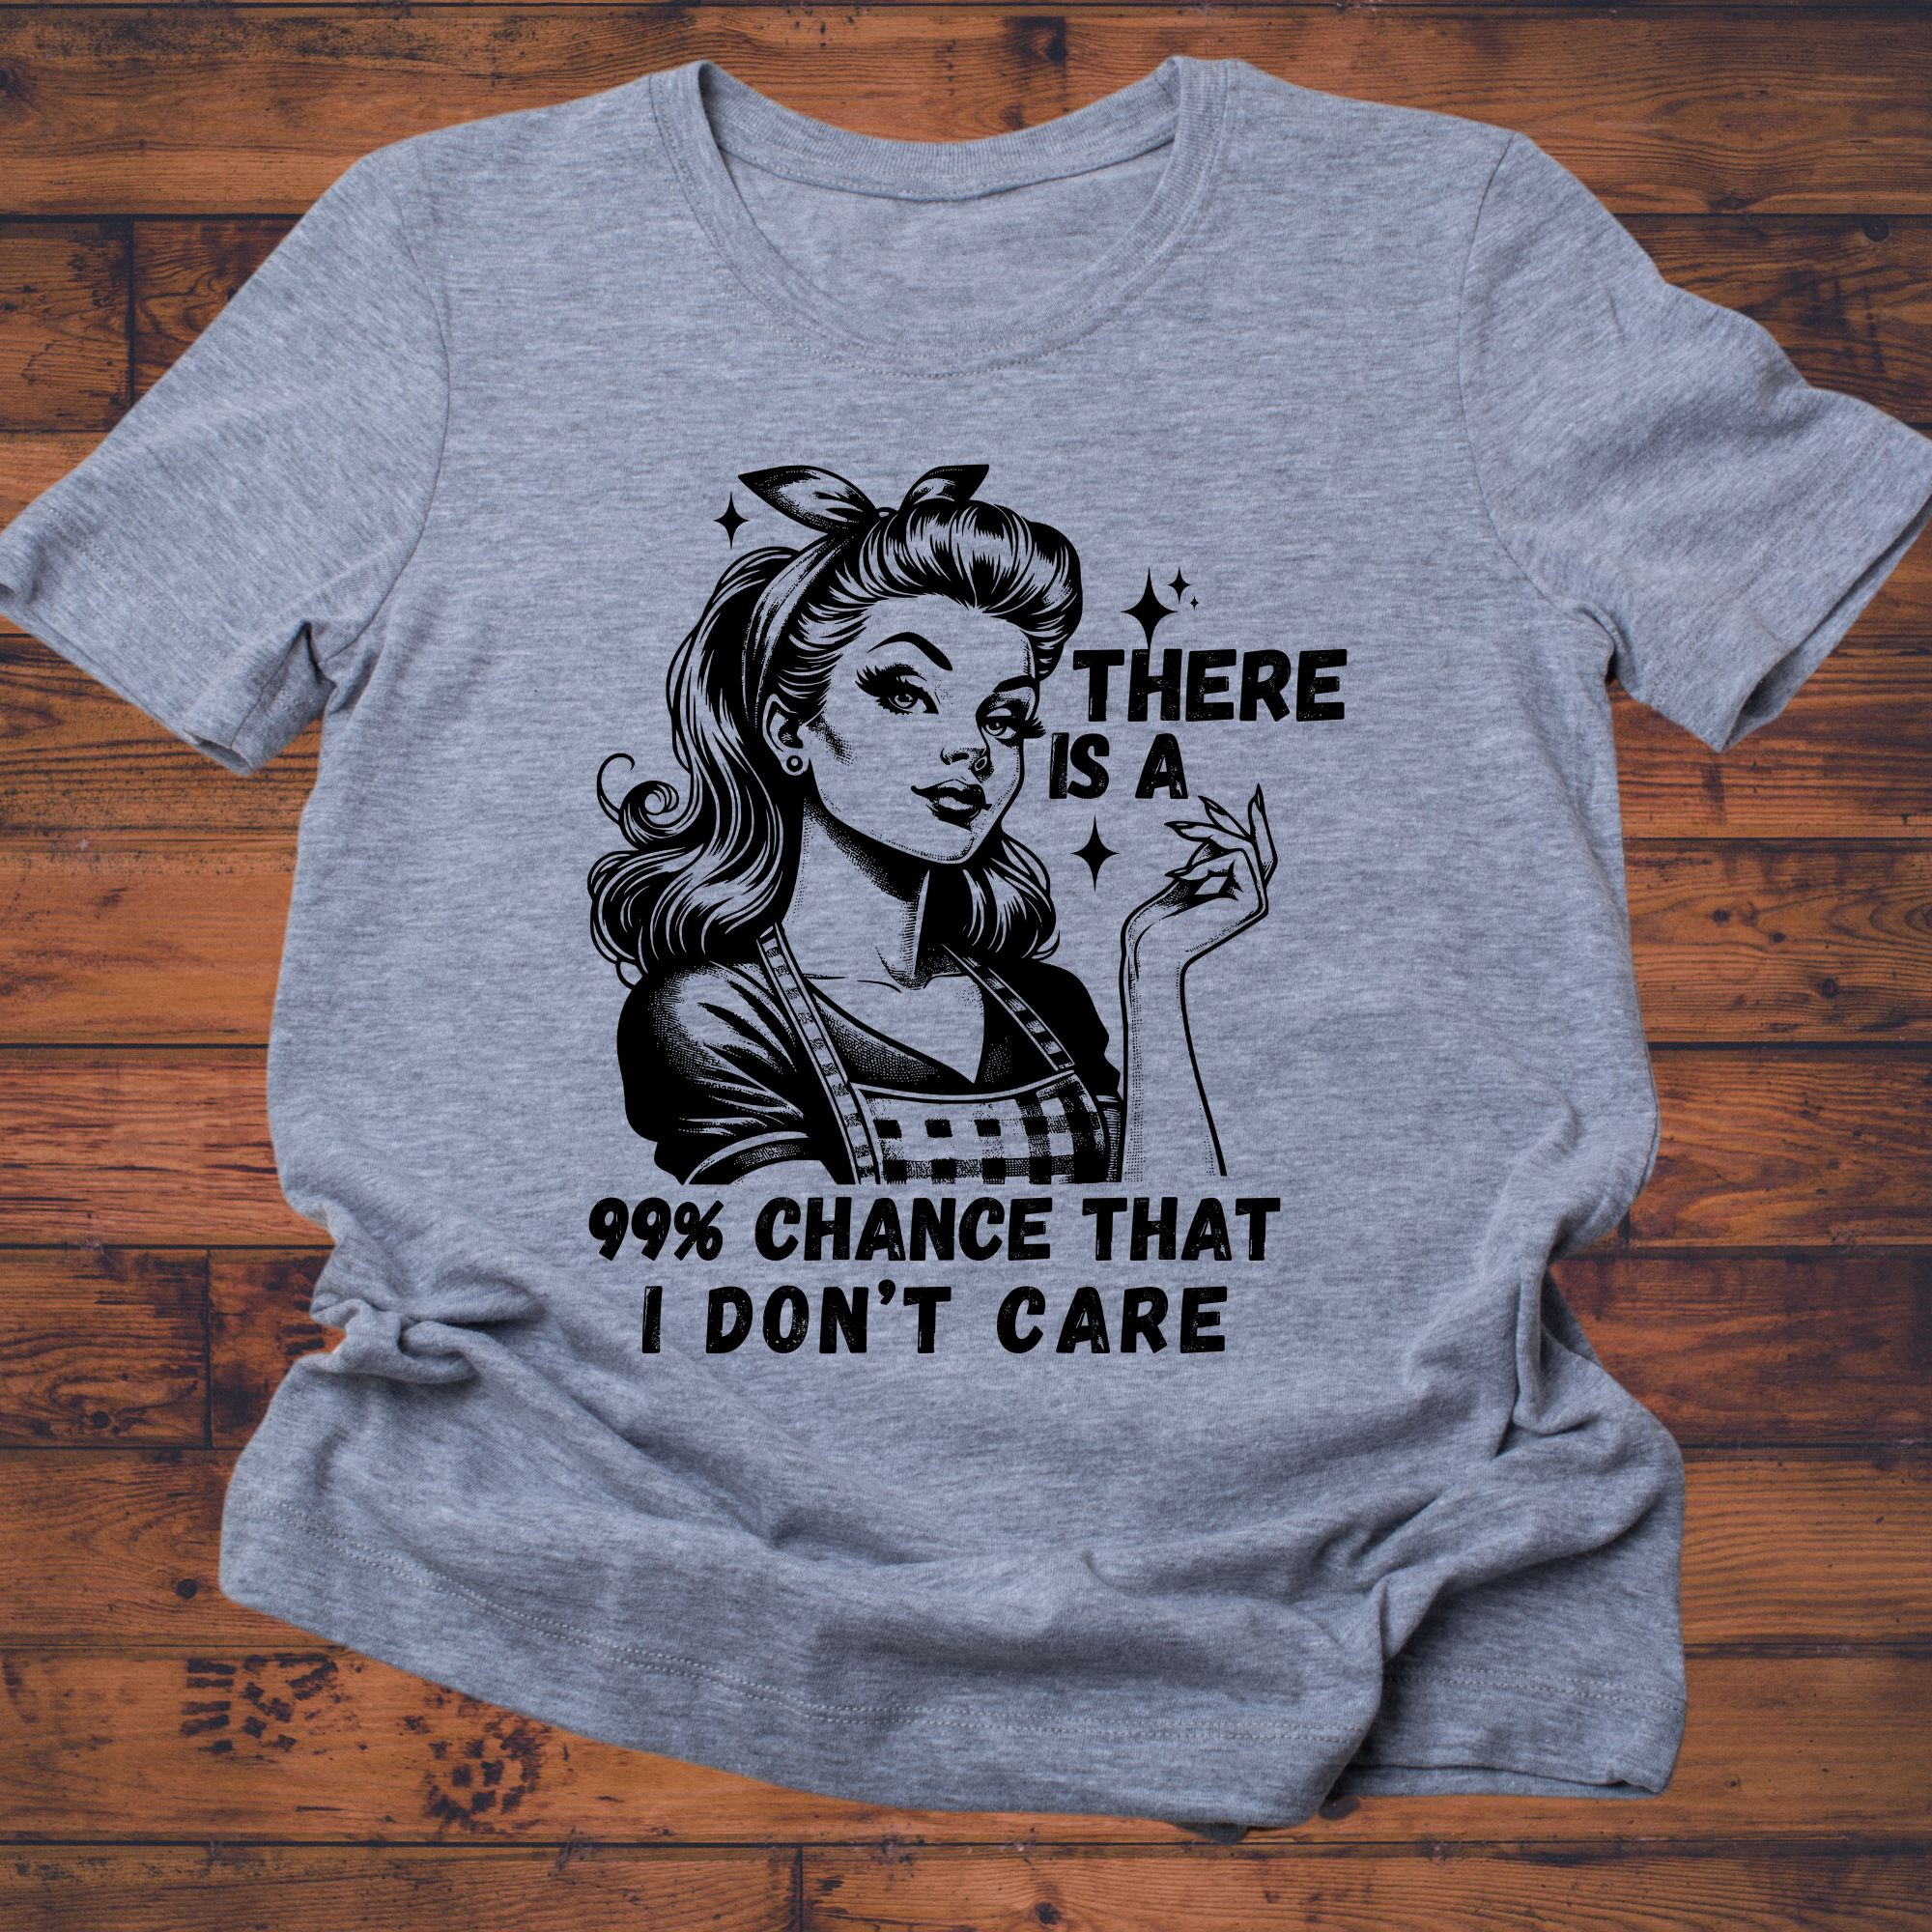 There is a 99% chance T-Shirt | I don’t care tee